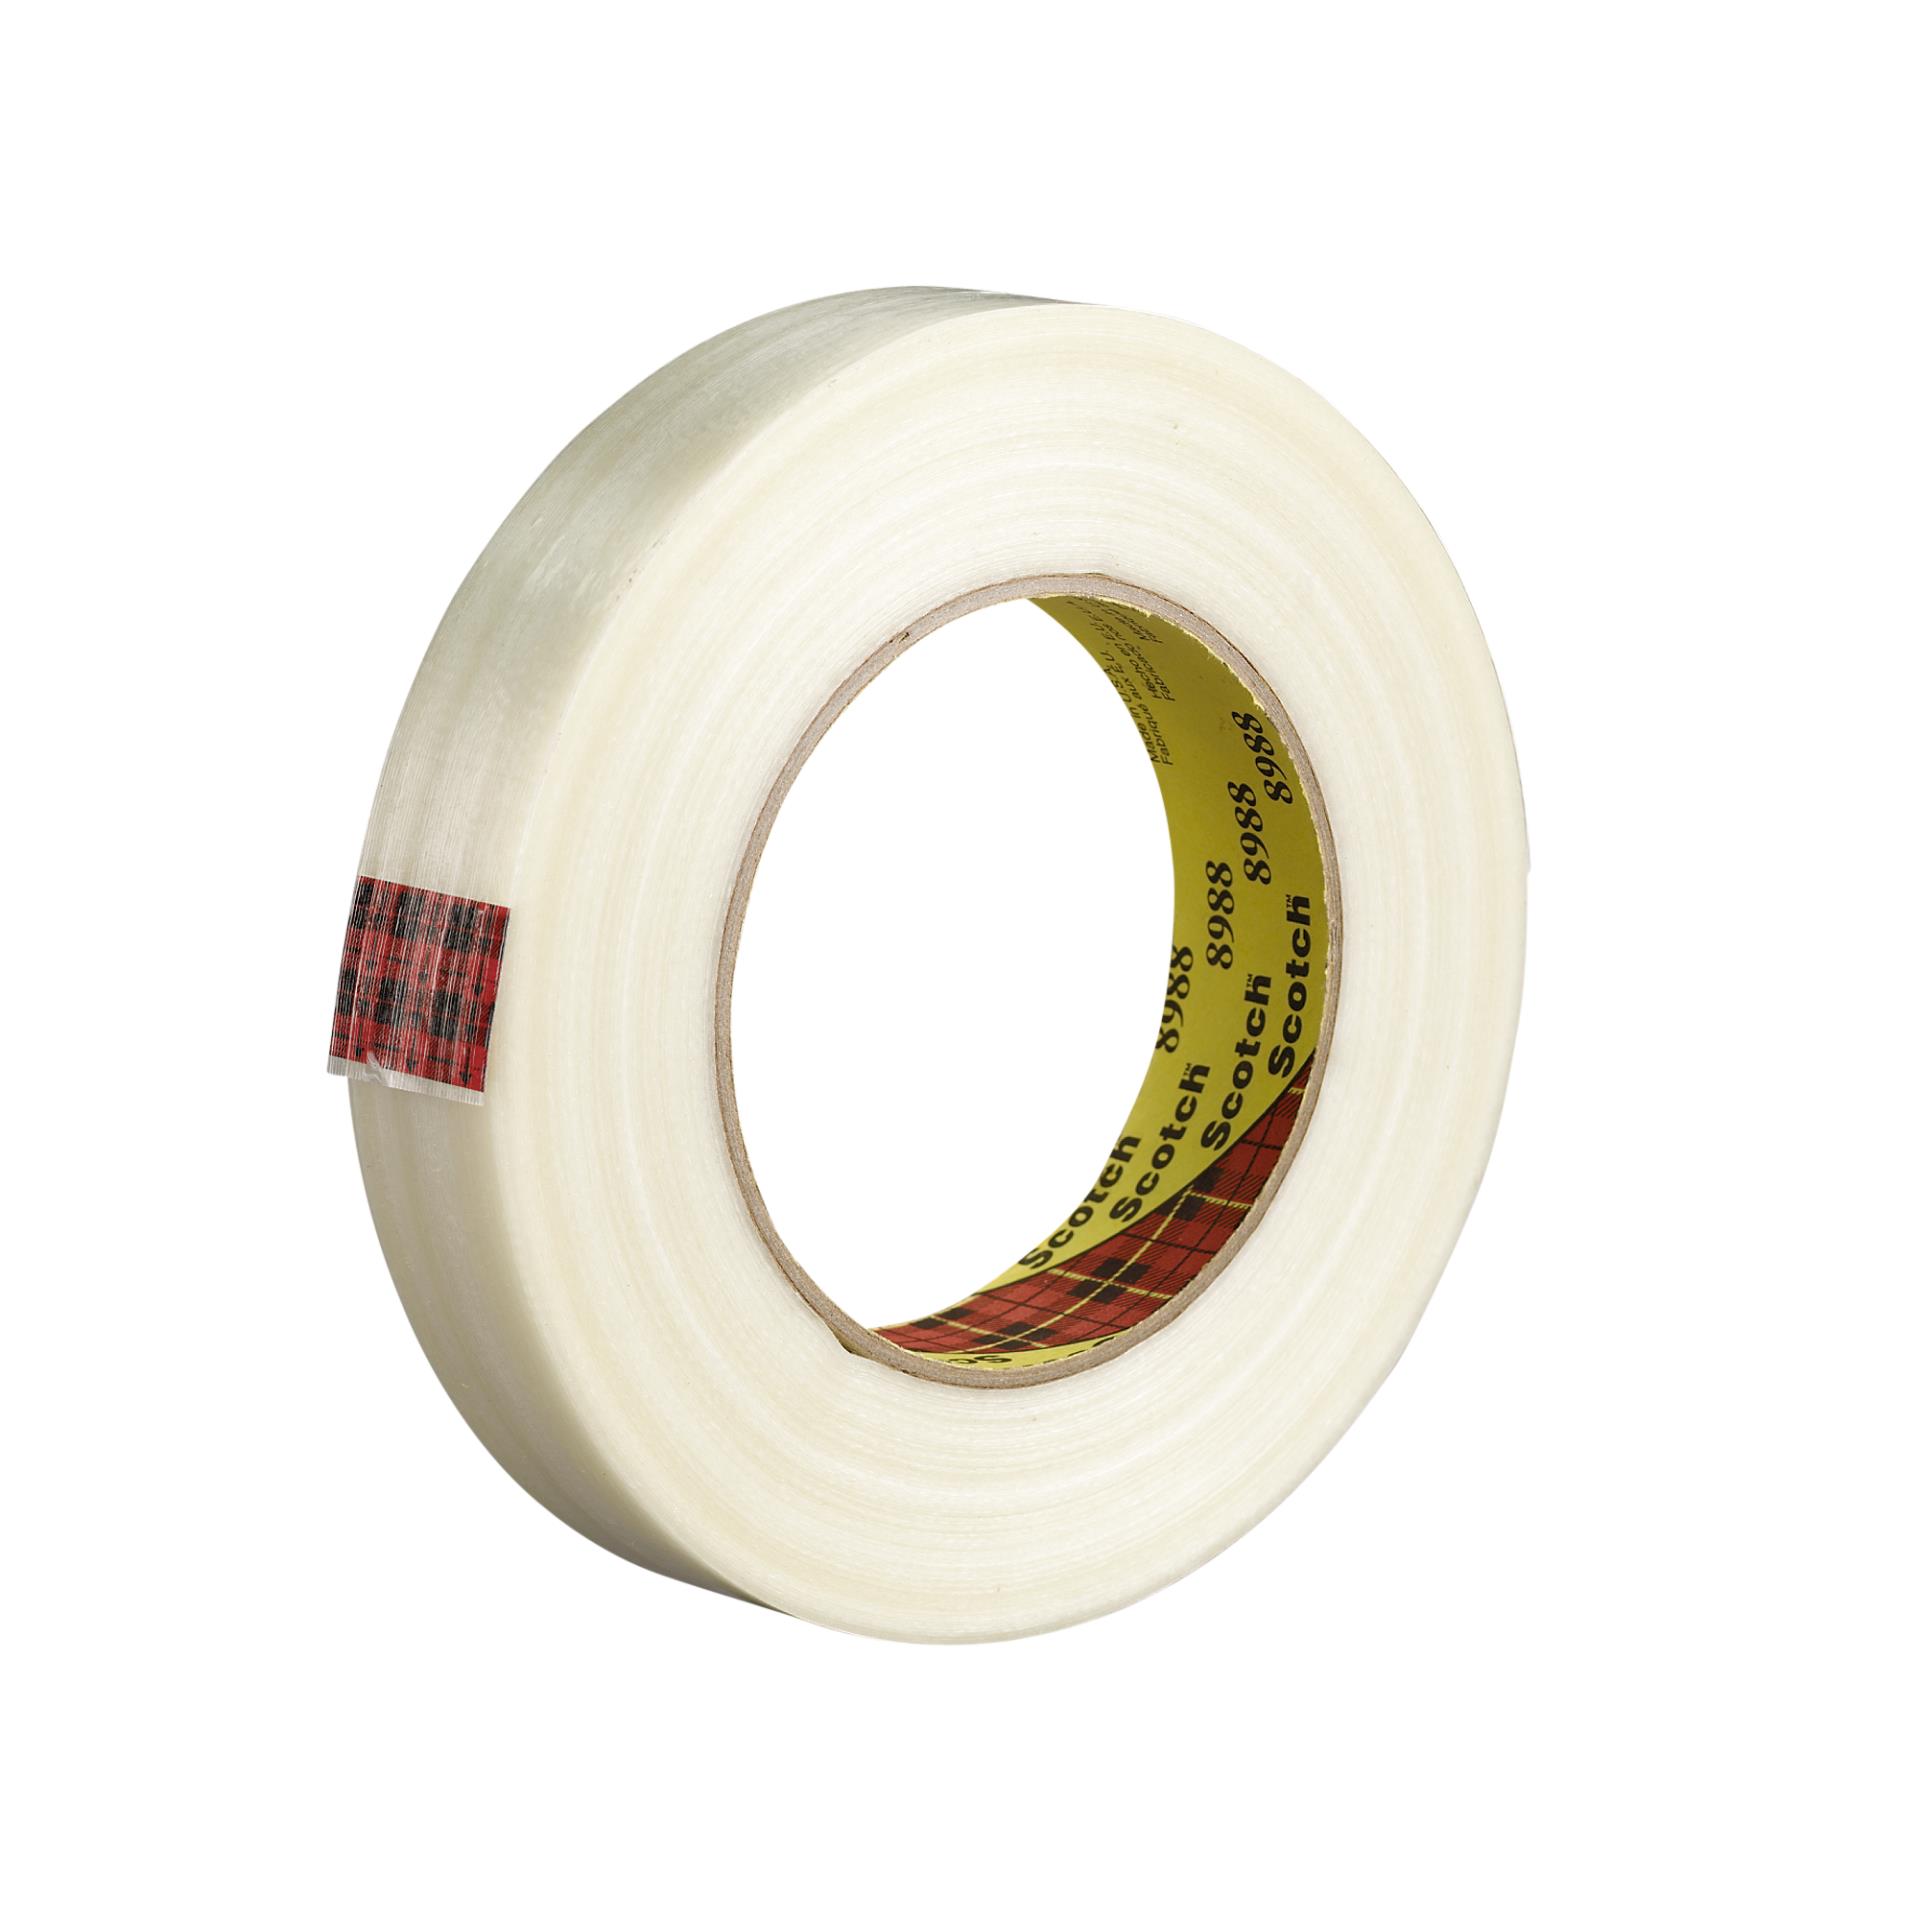 CS Hyde High Temperature Fiberglass Tape With Silicone Adhesive Ivory 1/2 inch 